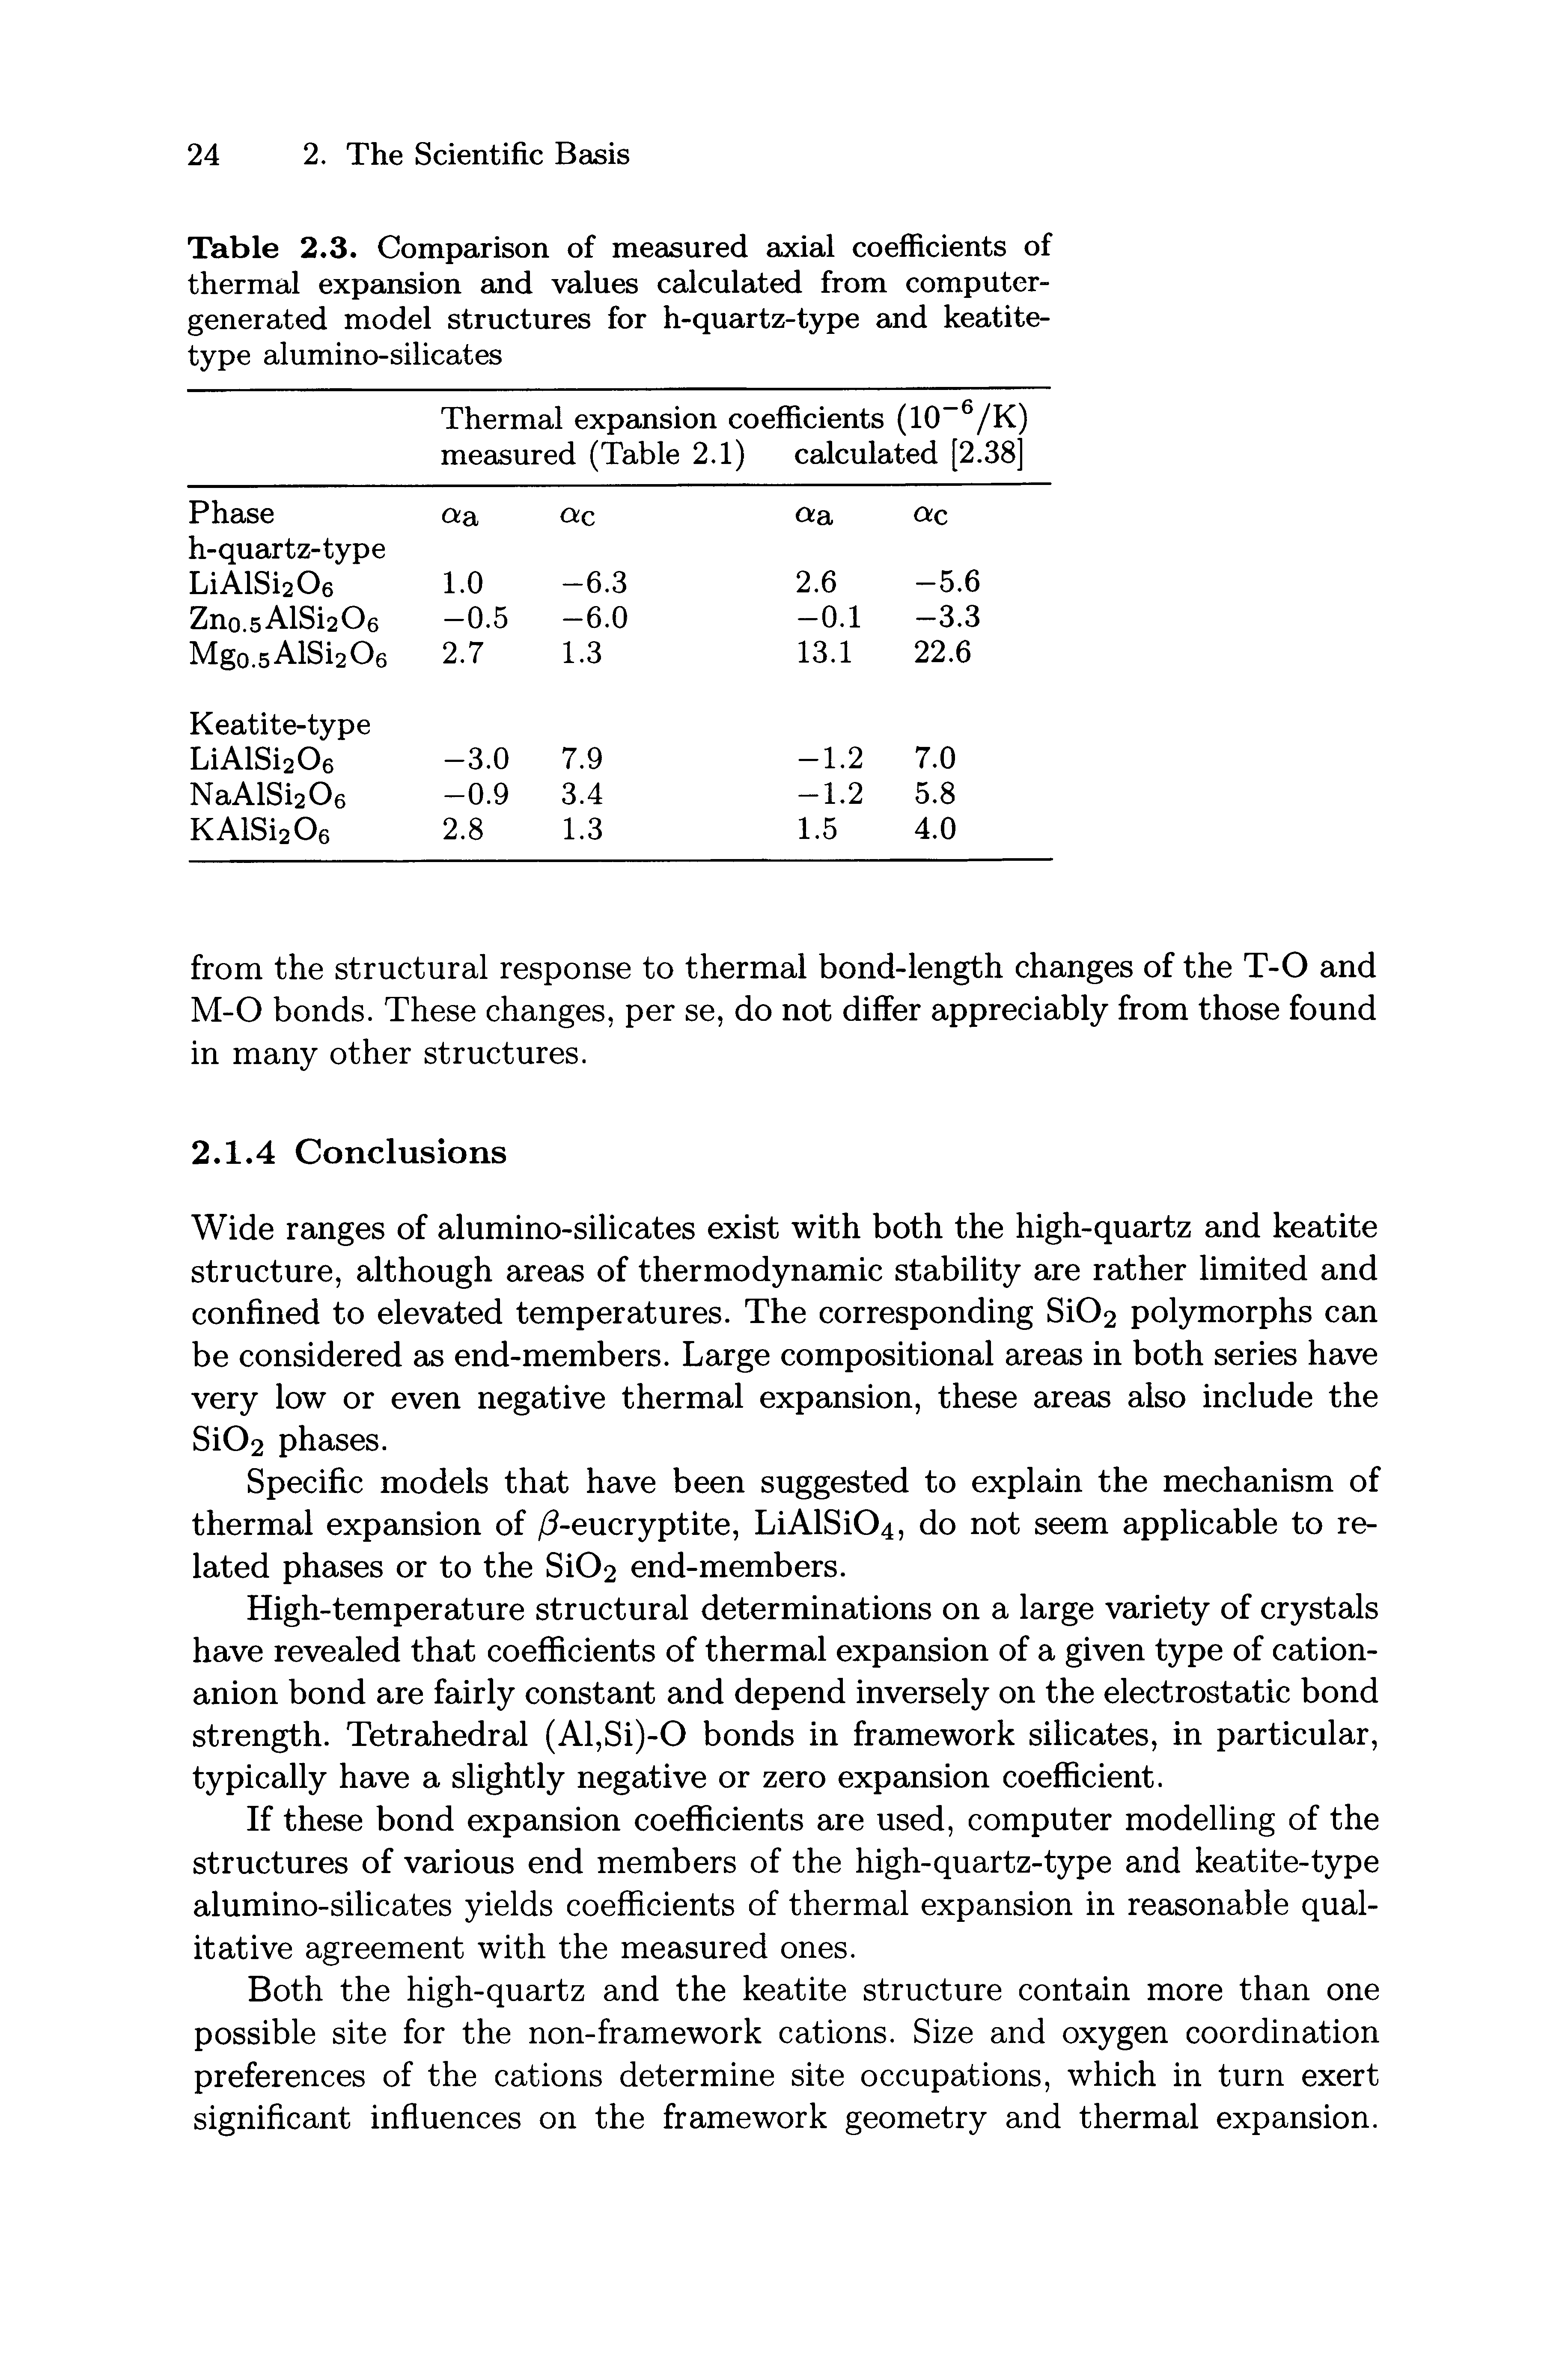 Table 2.3. Comparison of measured axial coefficients of thermal expansion and values calculated from computergenerated model structures for h-quartz-type and keatite-type alumino-silicates...